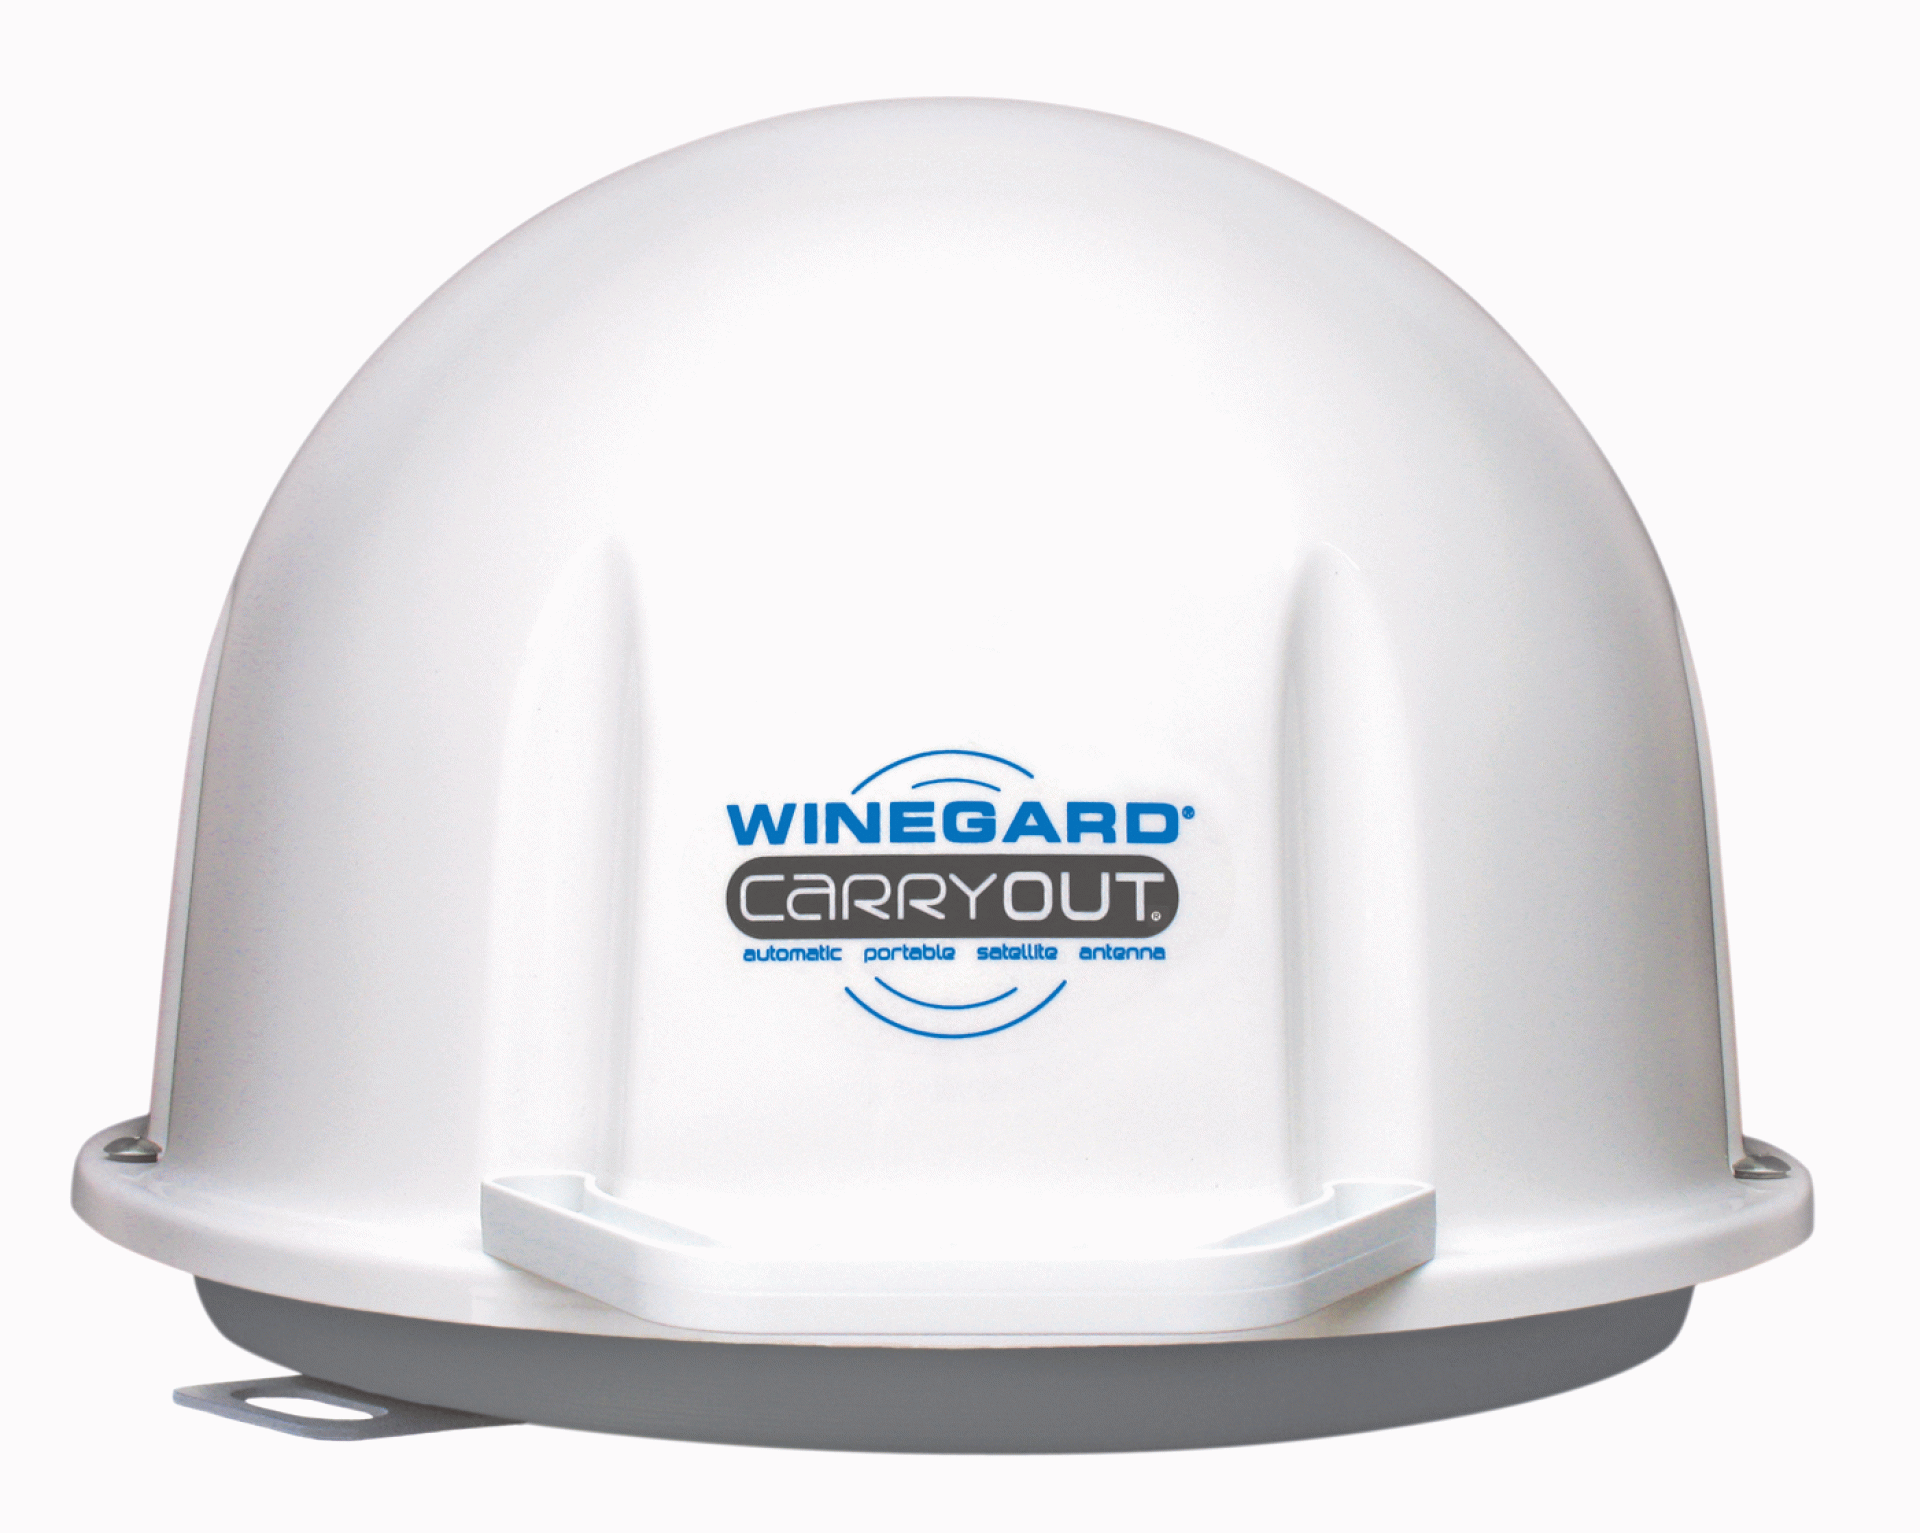 Winegard | GM-1518 | Carryout Automatic Portable Satellite Antenna